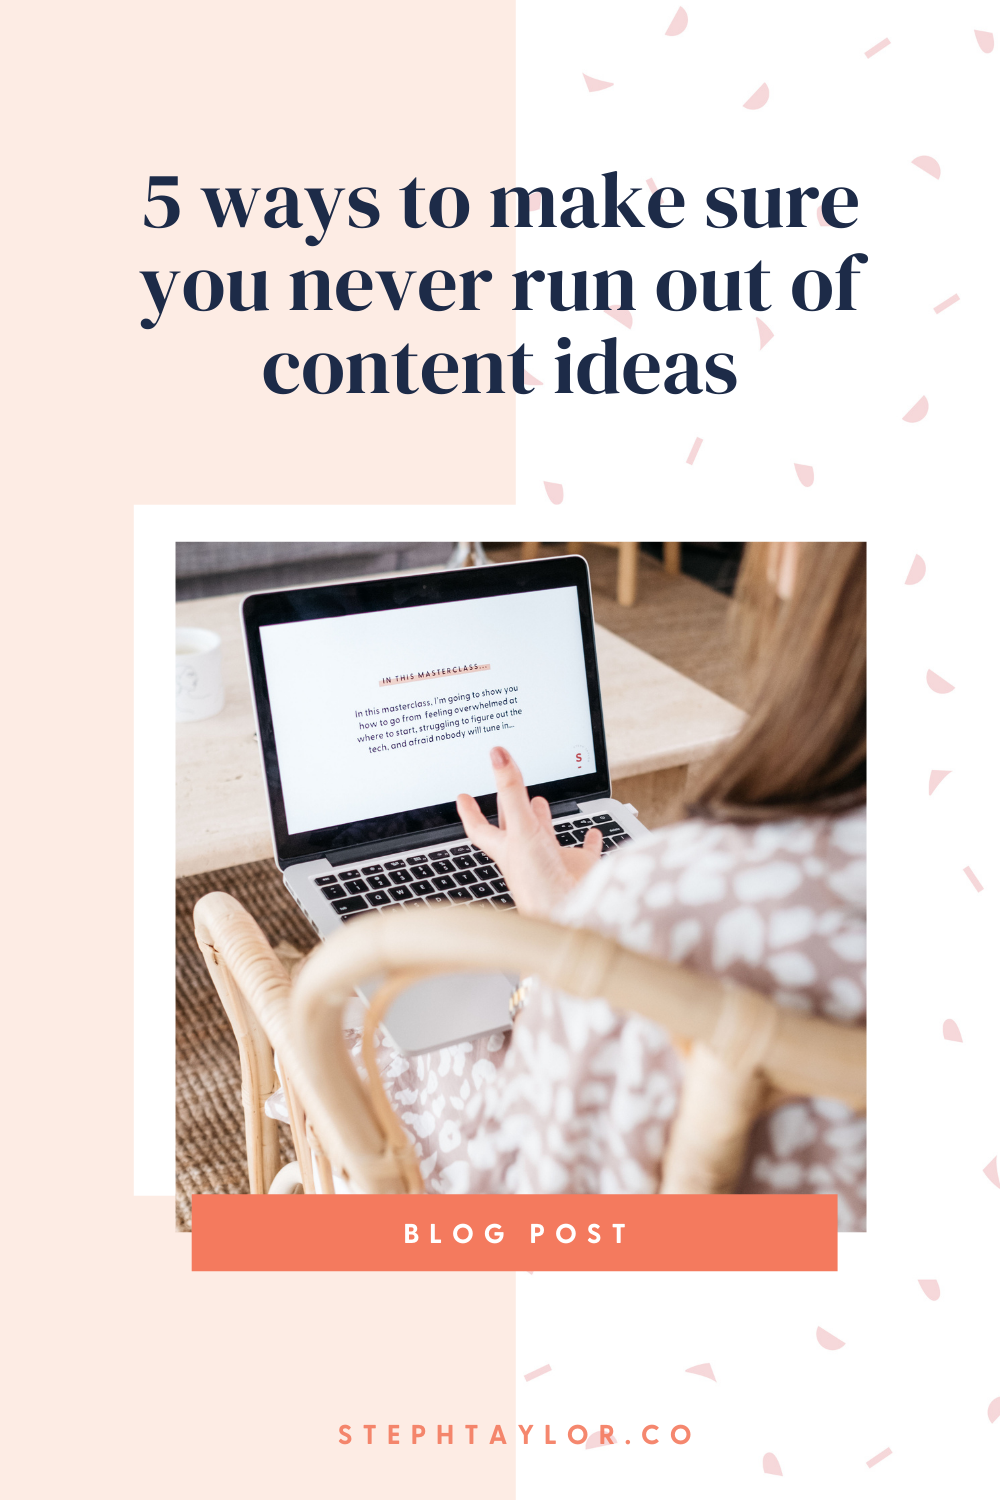 5 ways to make sure you never run out of content ideas